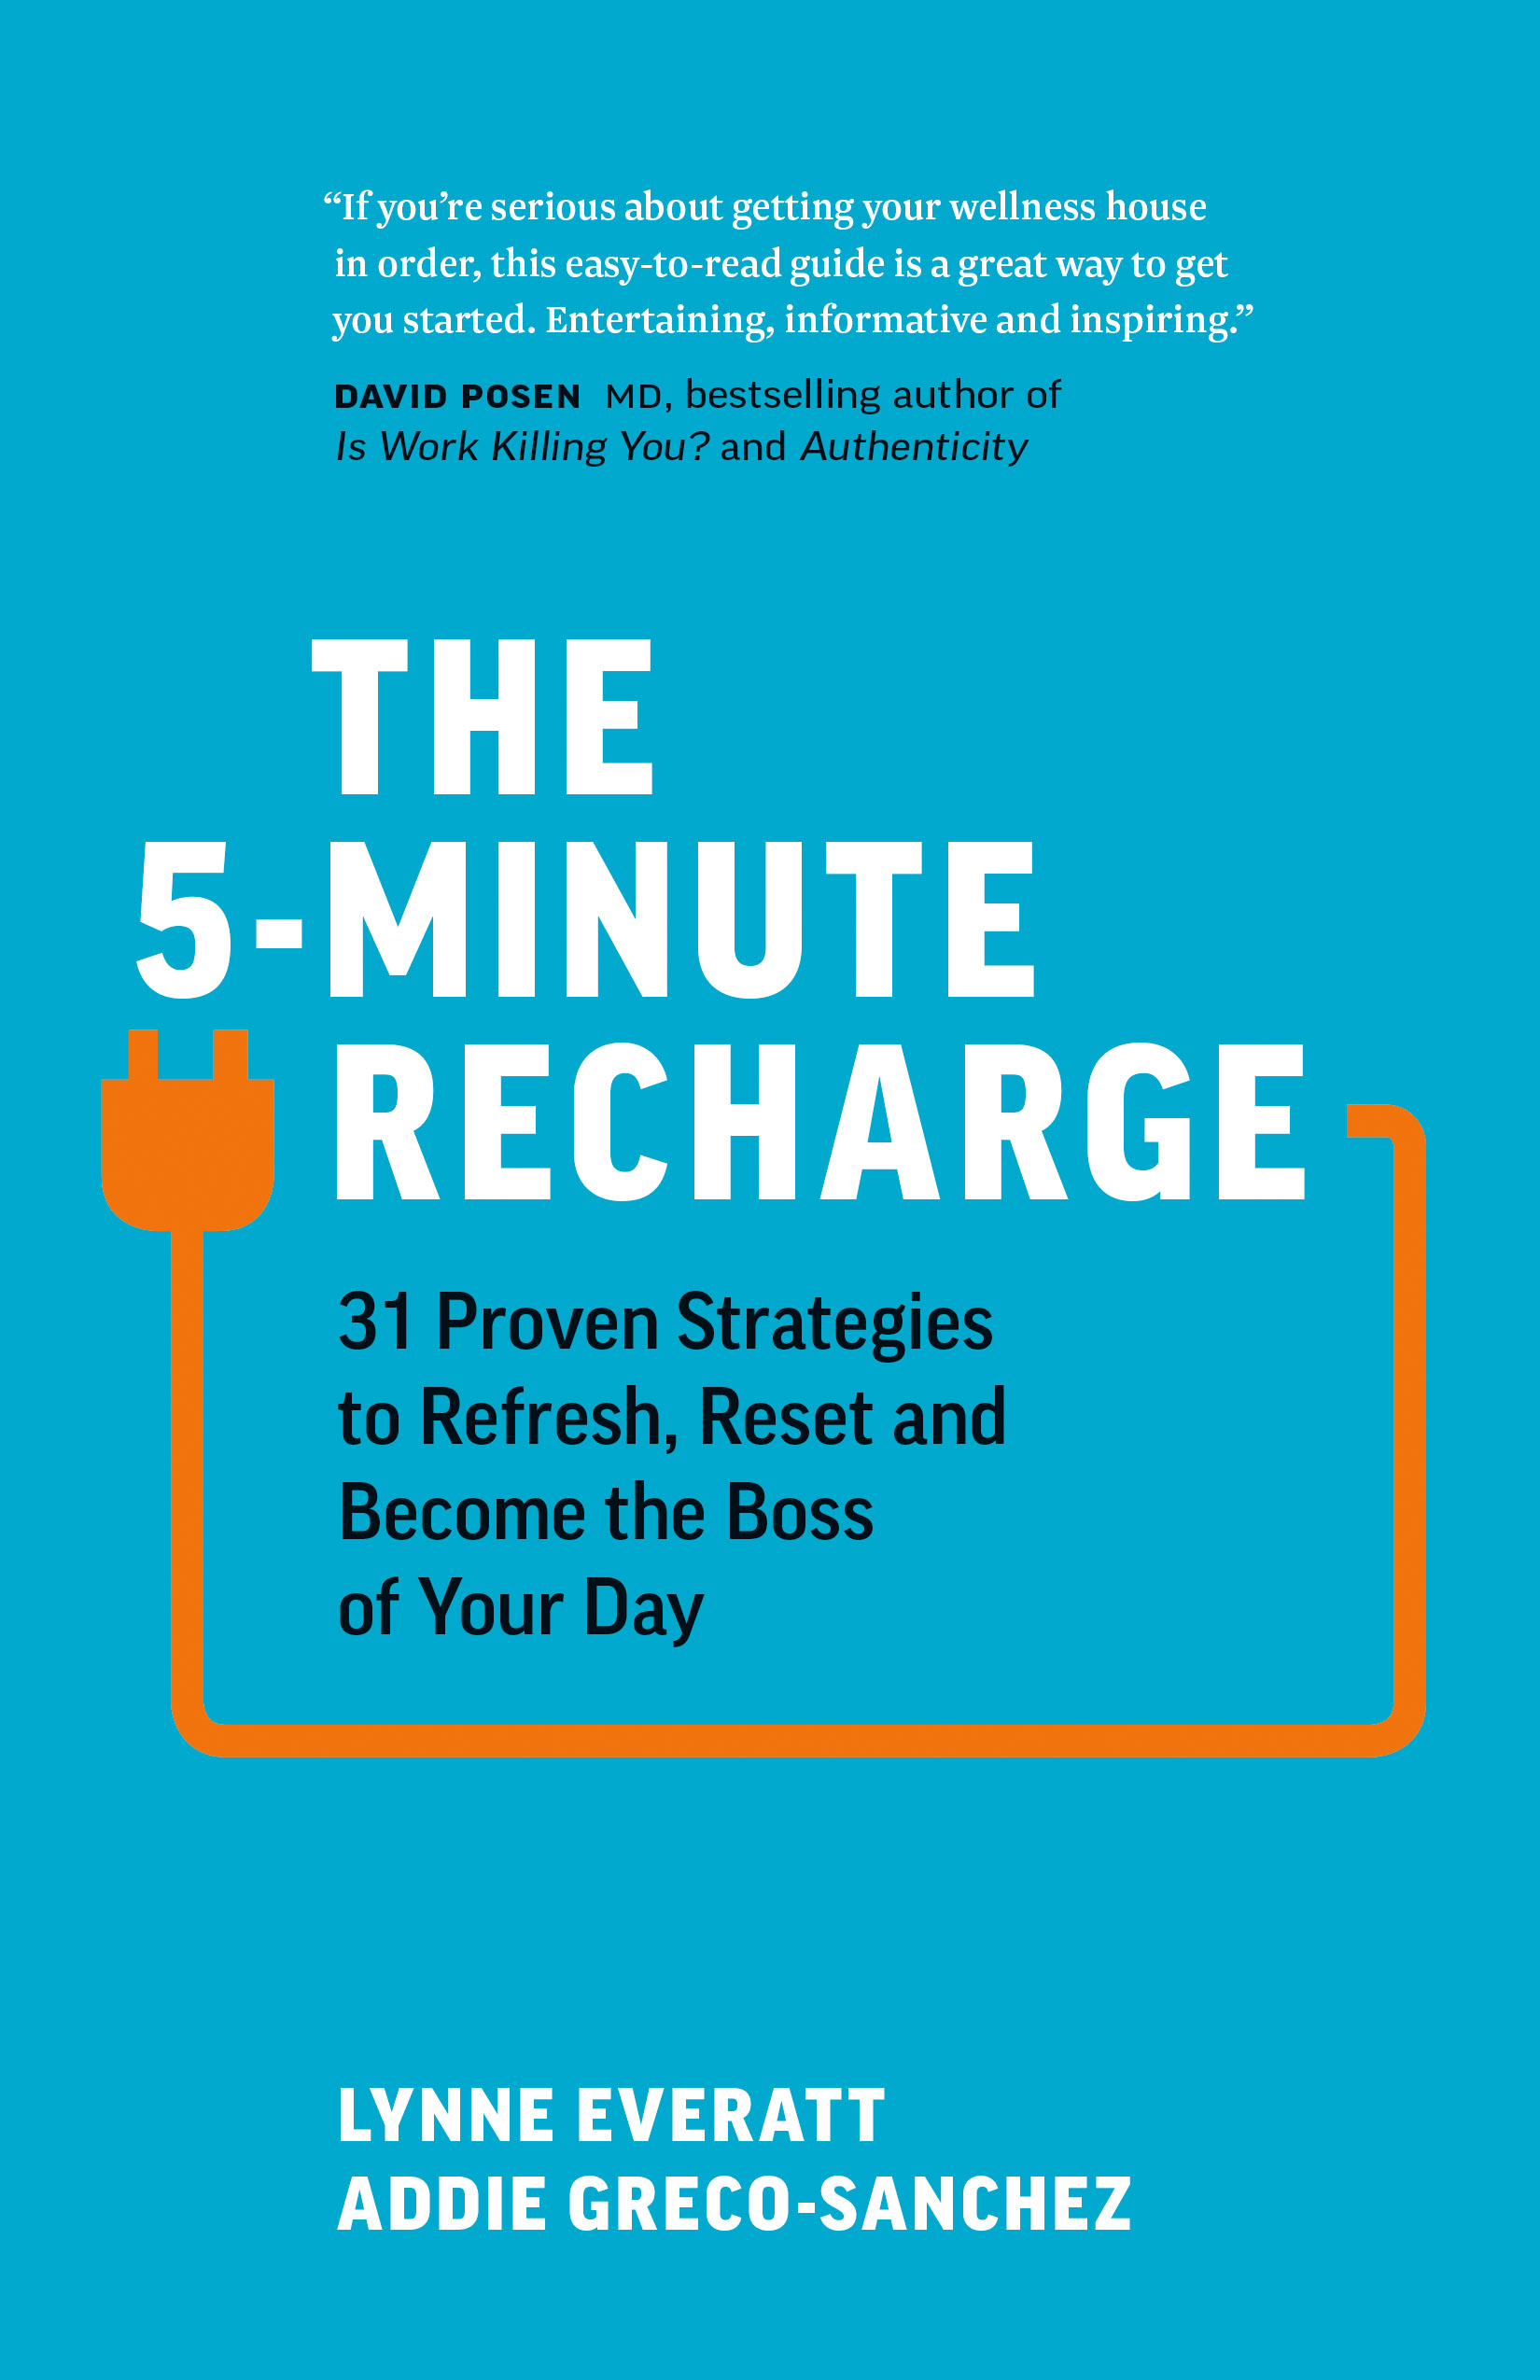 5-Minute Recharge